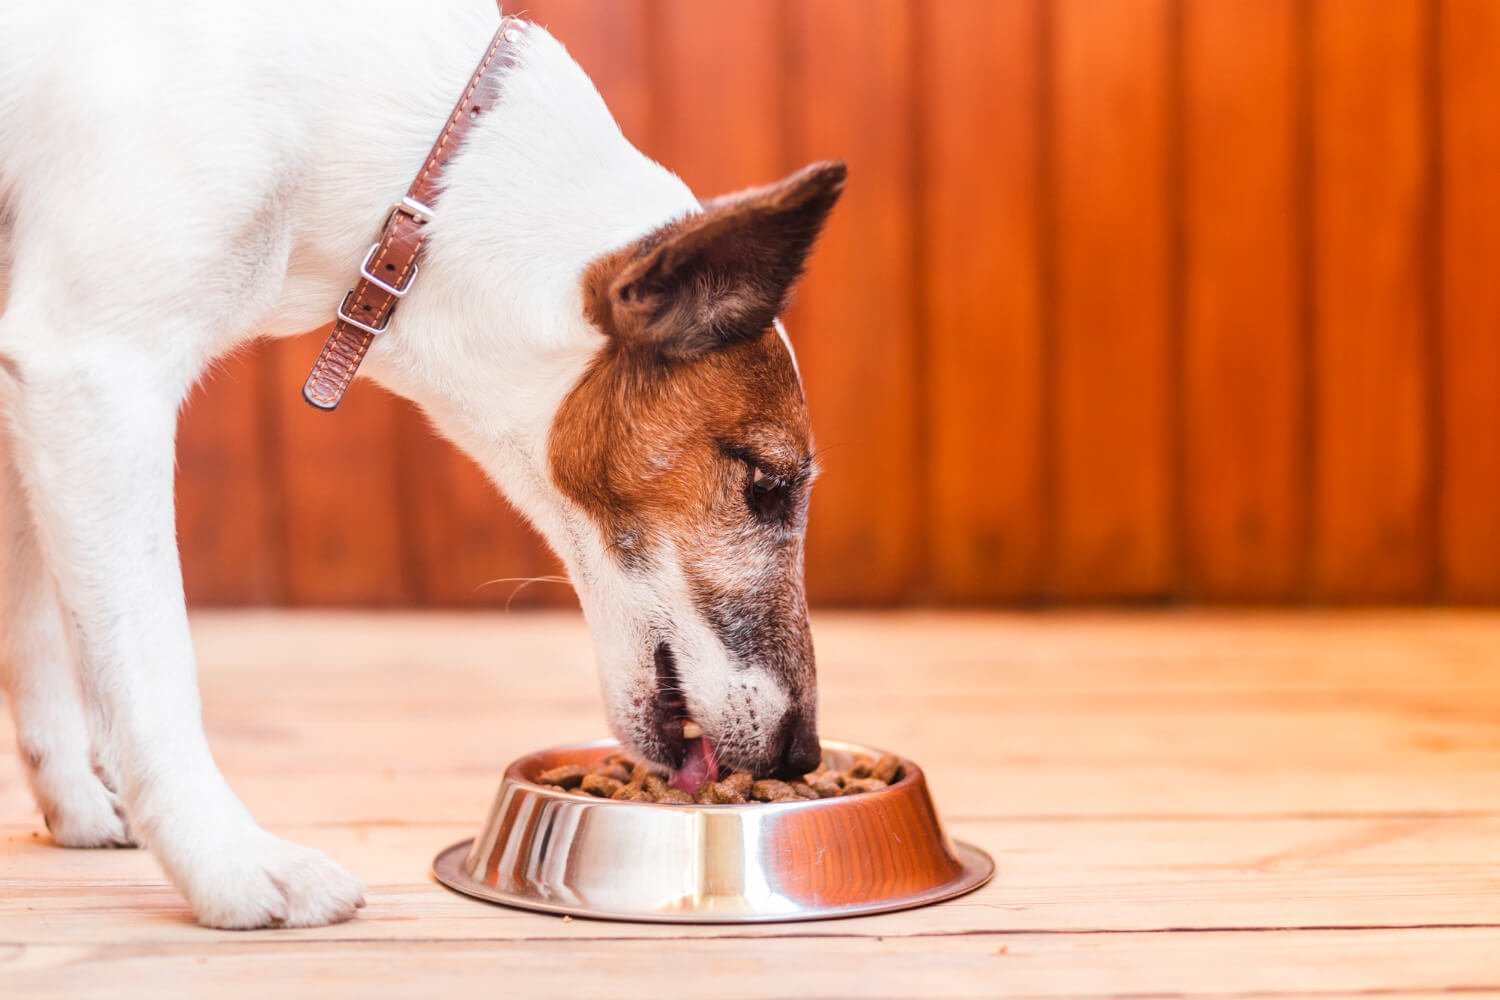 Which is the best pet food - raw or kibble?